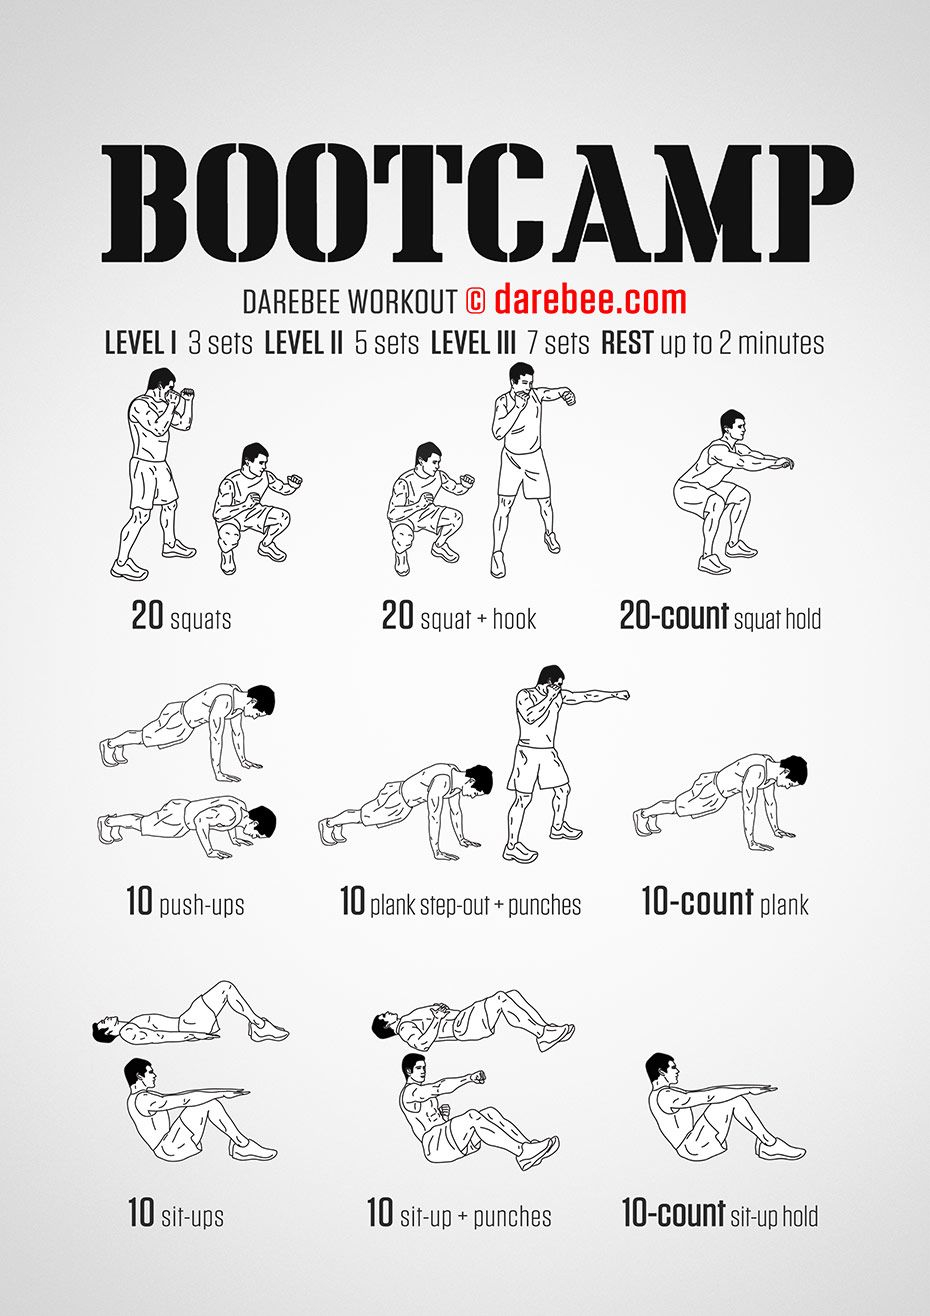 Bootcamp Workout Military Workout Boot Camp Workout 